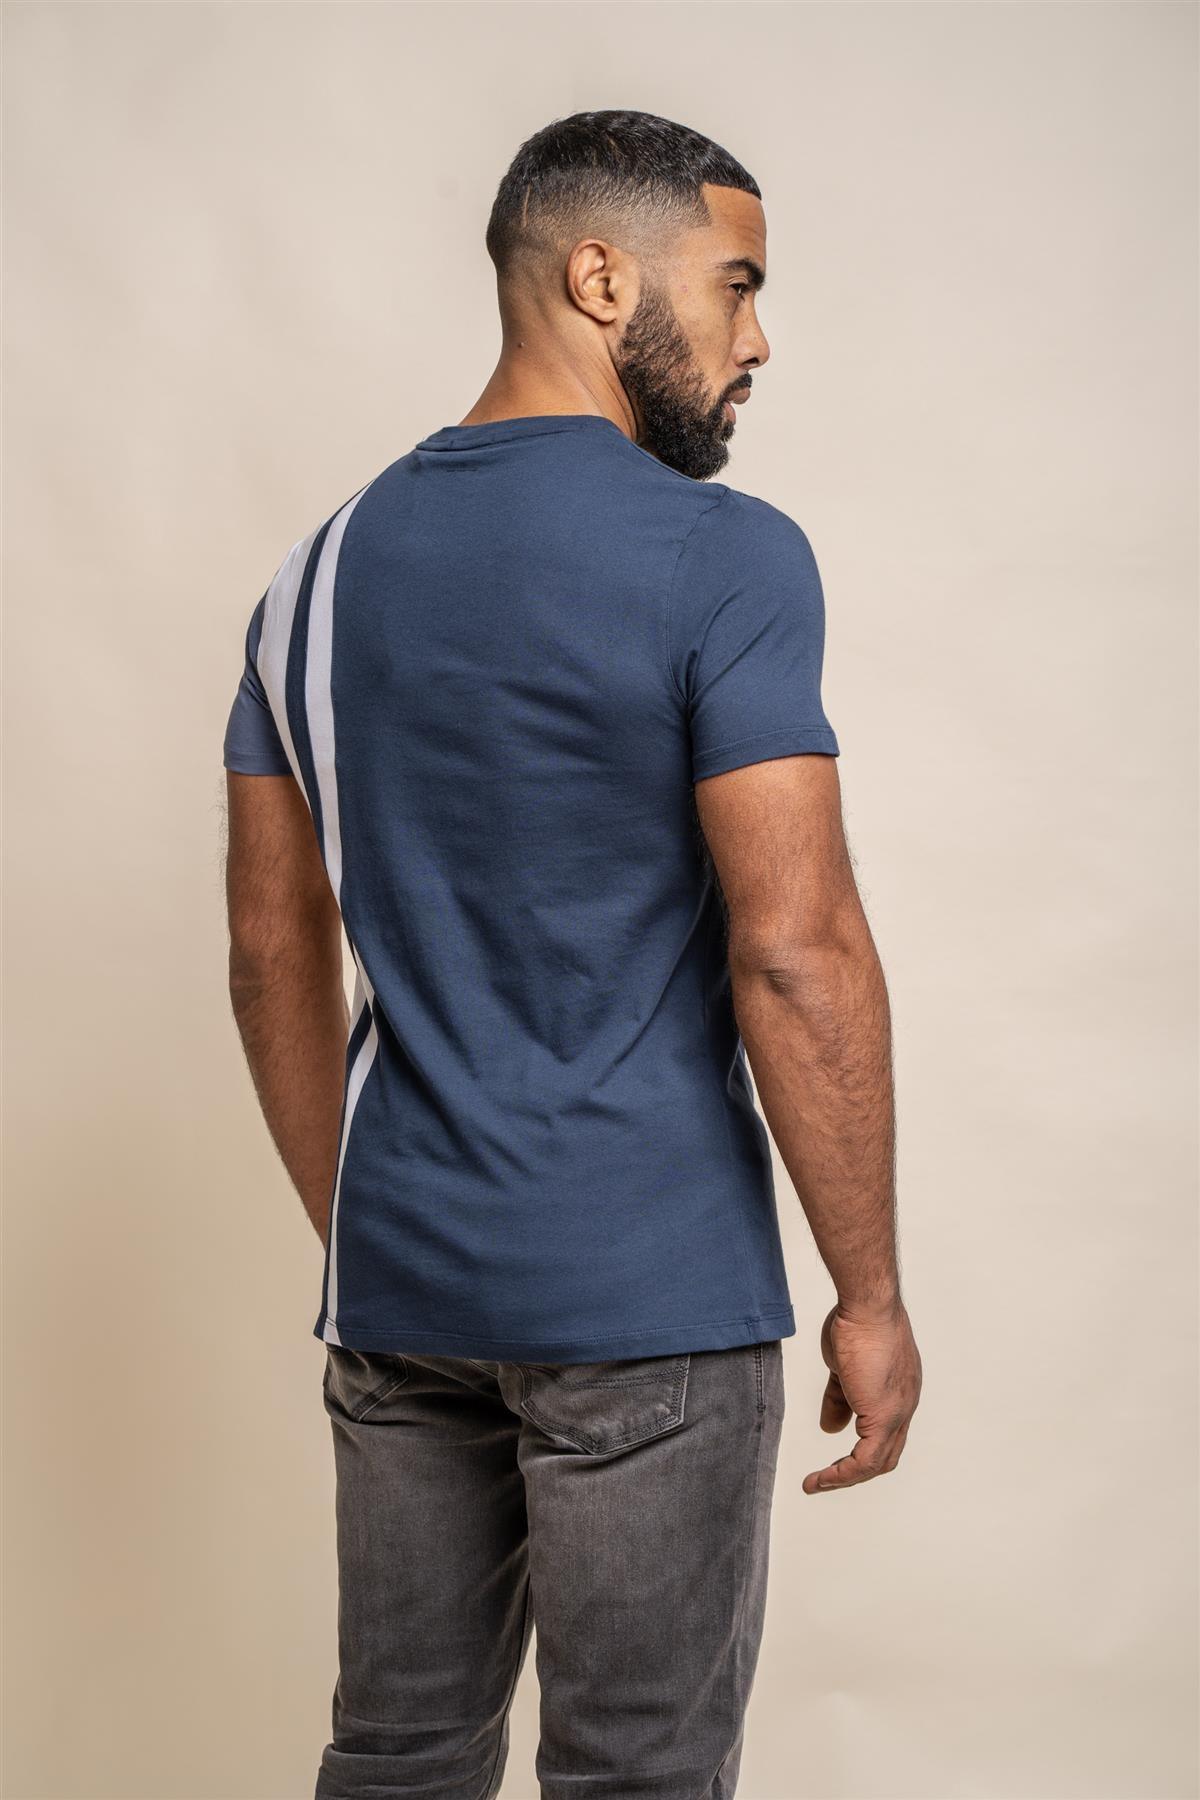 Capone navy T-shirt back